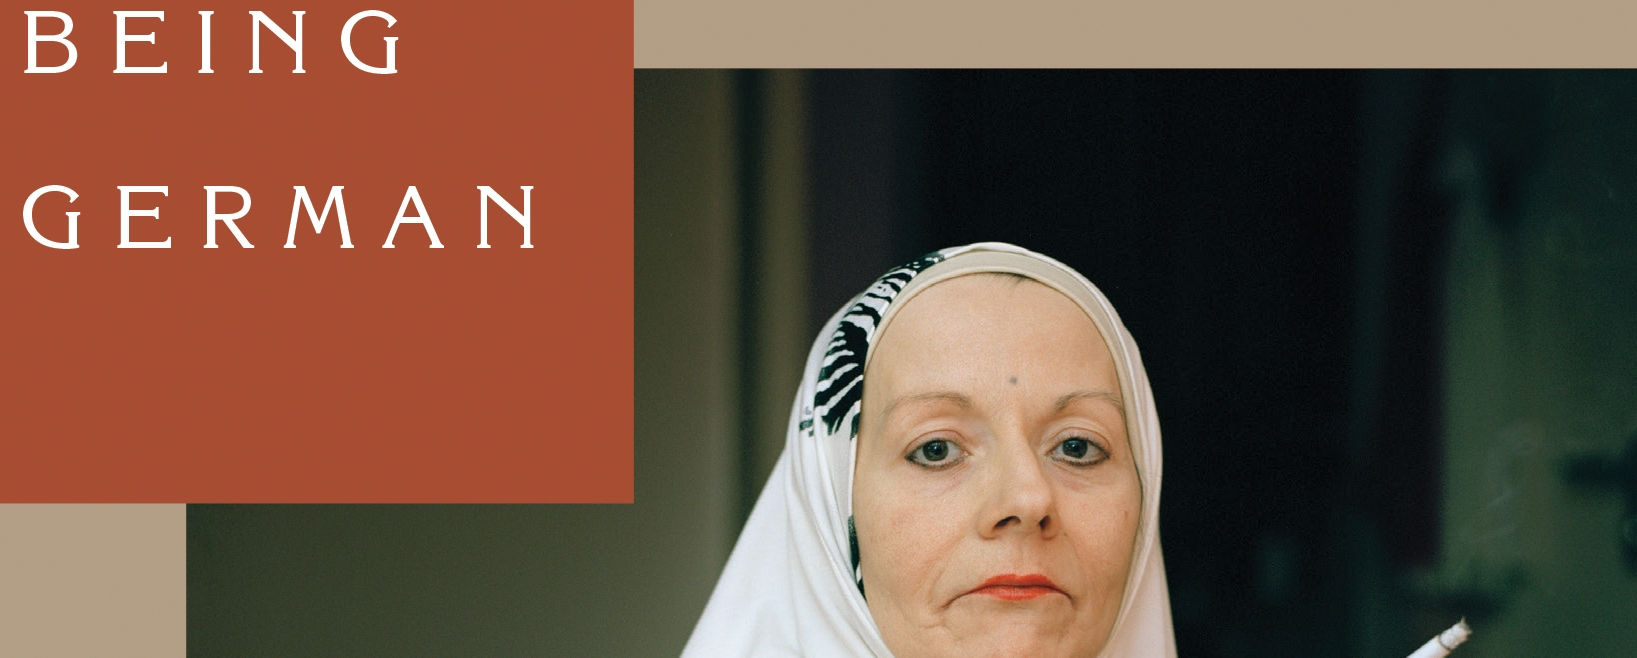 A white woman with a headscarf looks at the camera. To her left are the words "Being German".